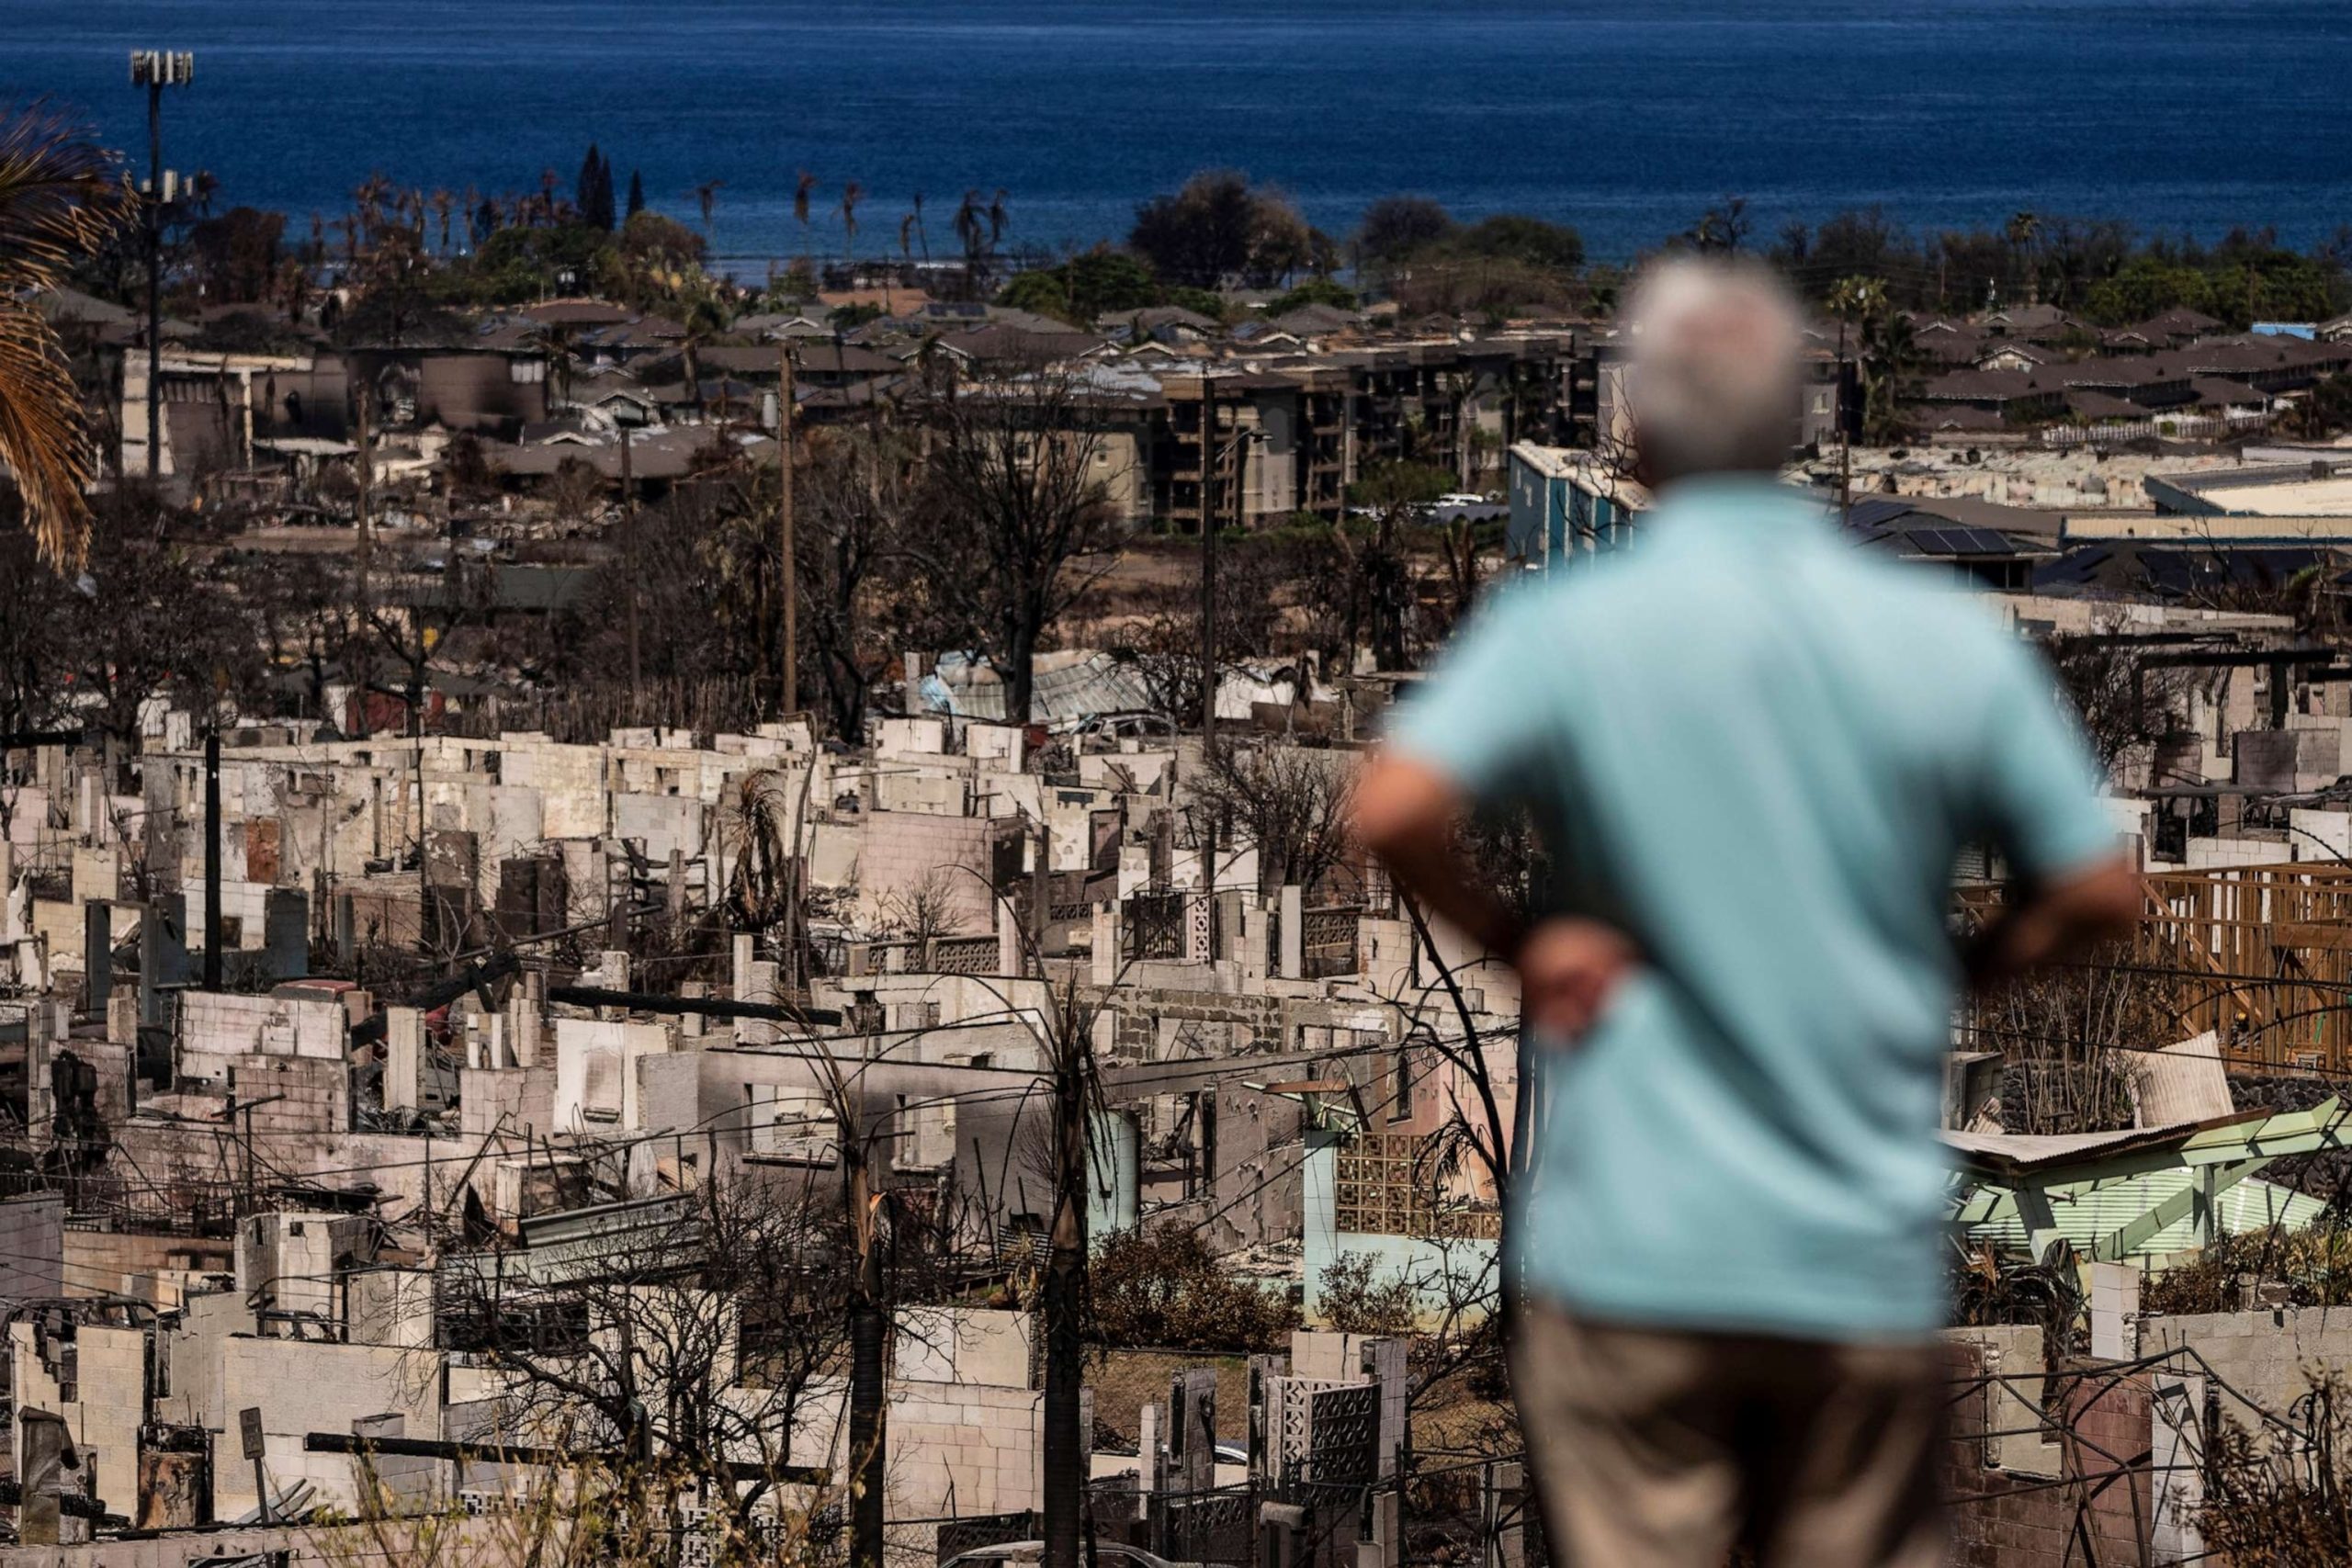 One Month After the Deadly Wildfires: Maui's Steady Progress in Rebuilding